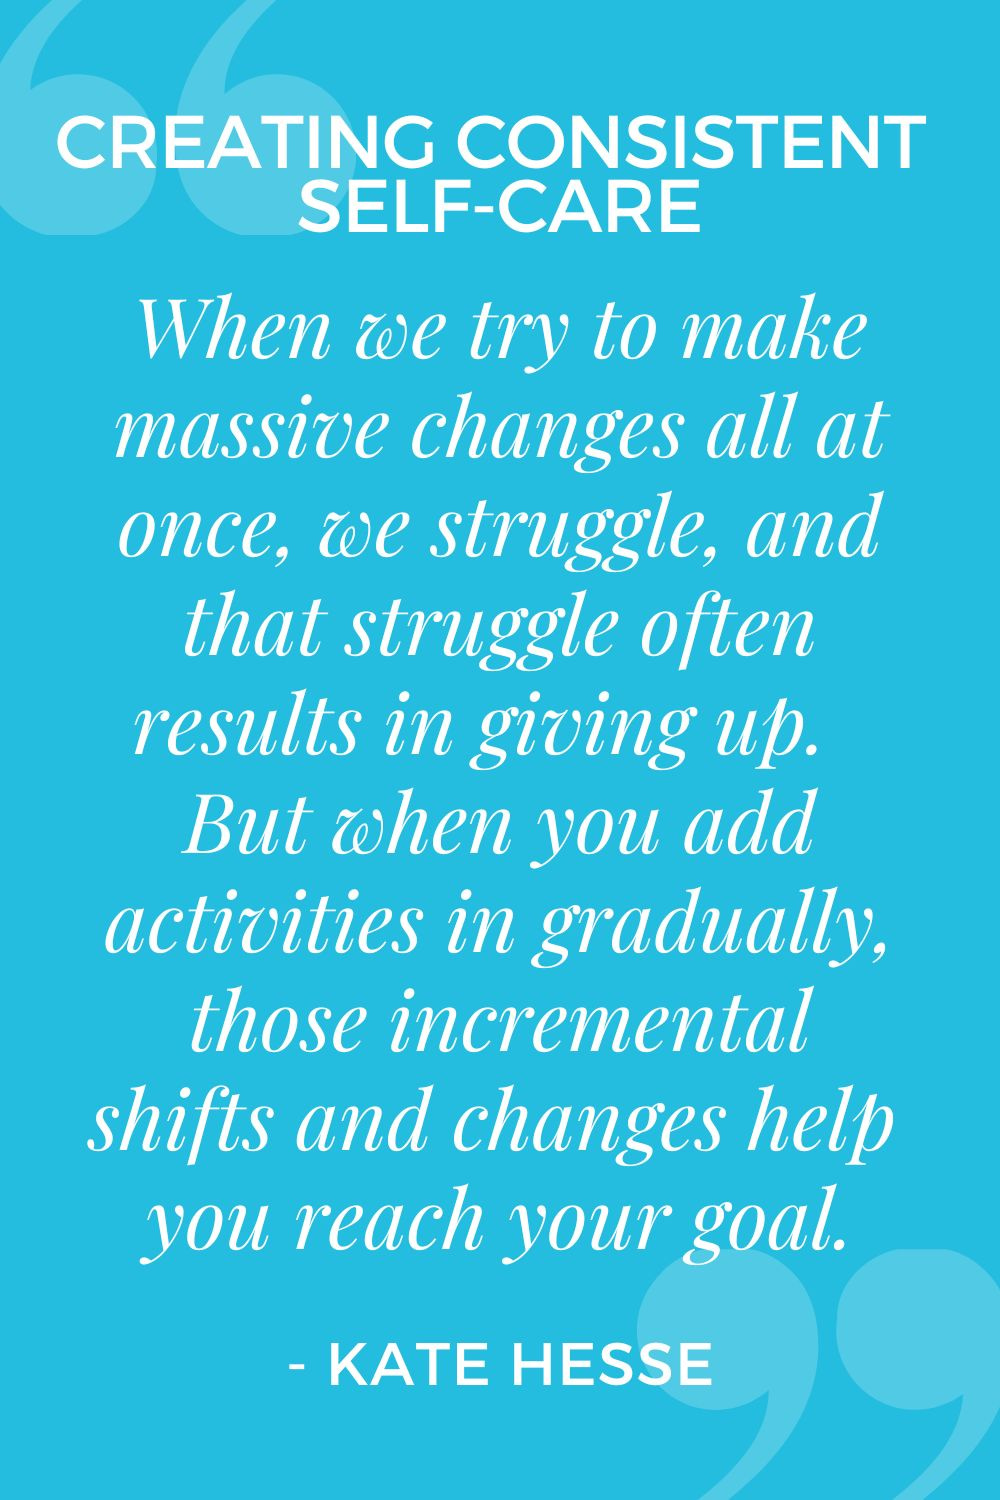 When we try to make massive changes all at once, we struggle, and that struggle often results in giving up. But when you add activities in gradually, those incremental shifts and changes help you reach your goal.